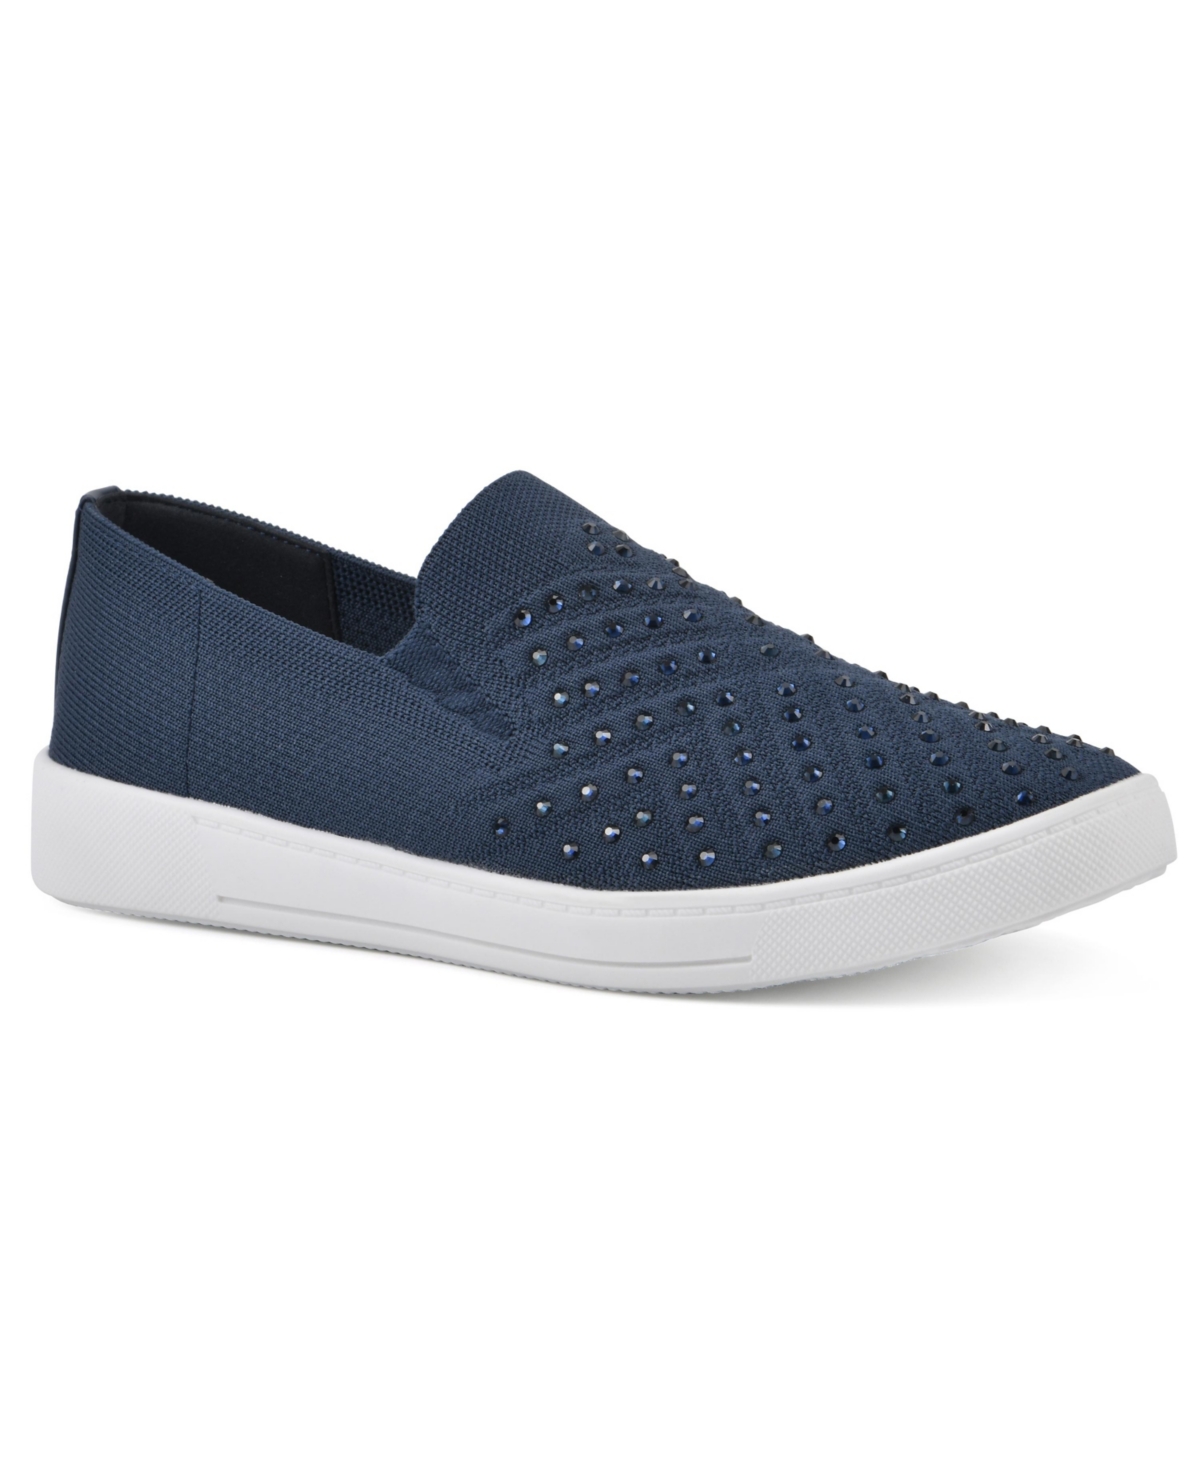 White Mountain Upbring Slip On Sneakers In Navy Fabric